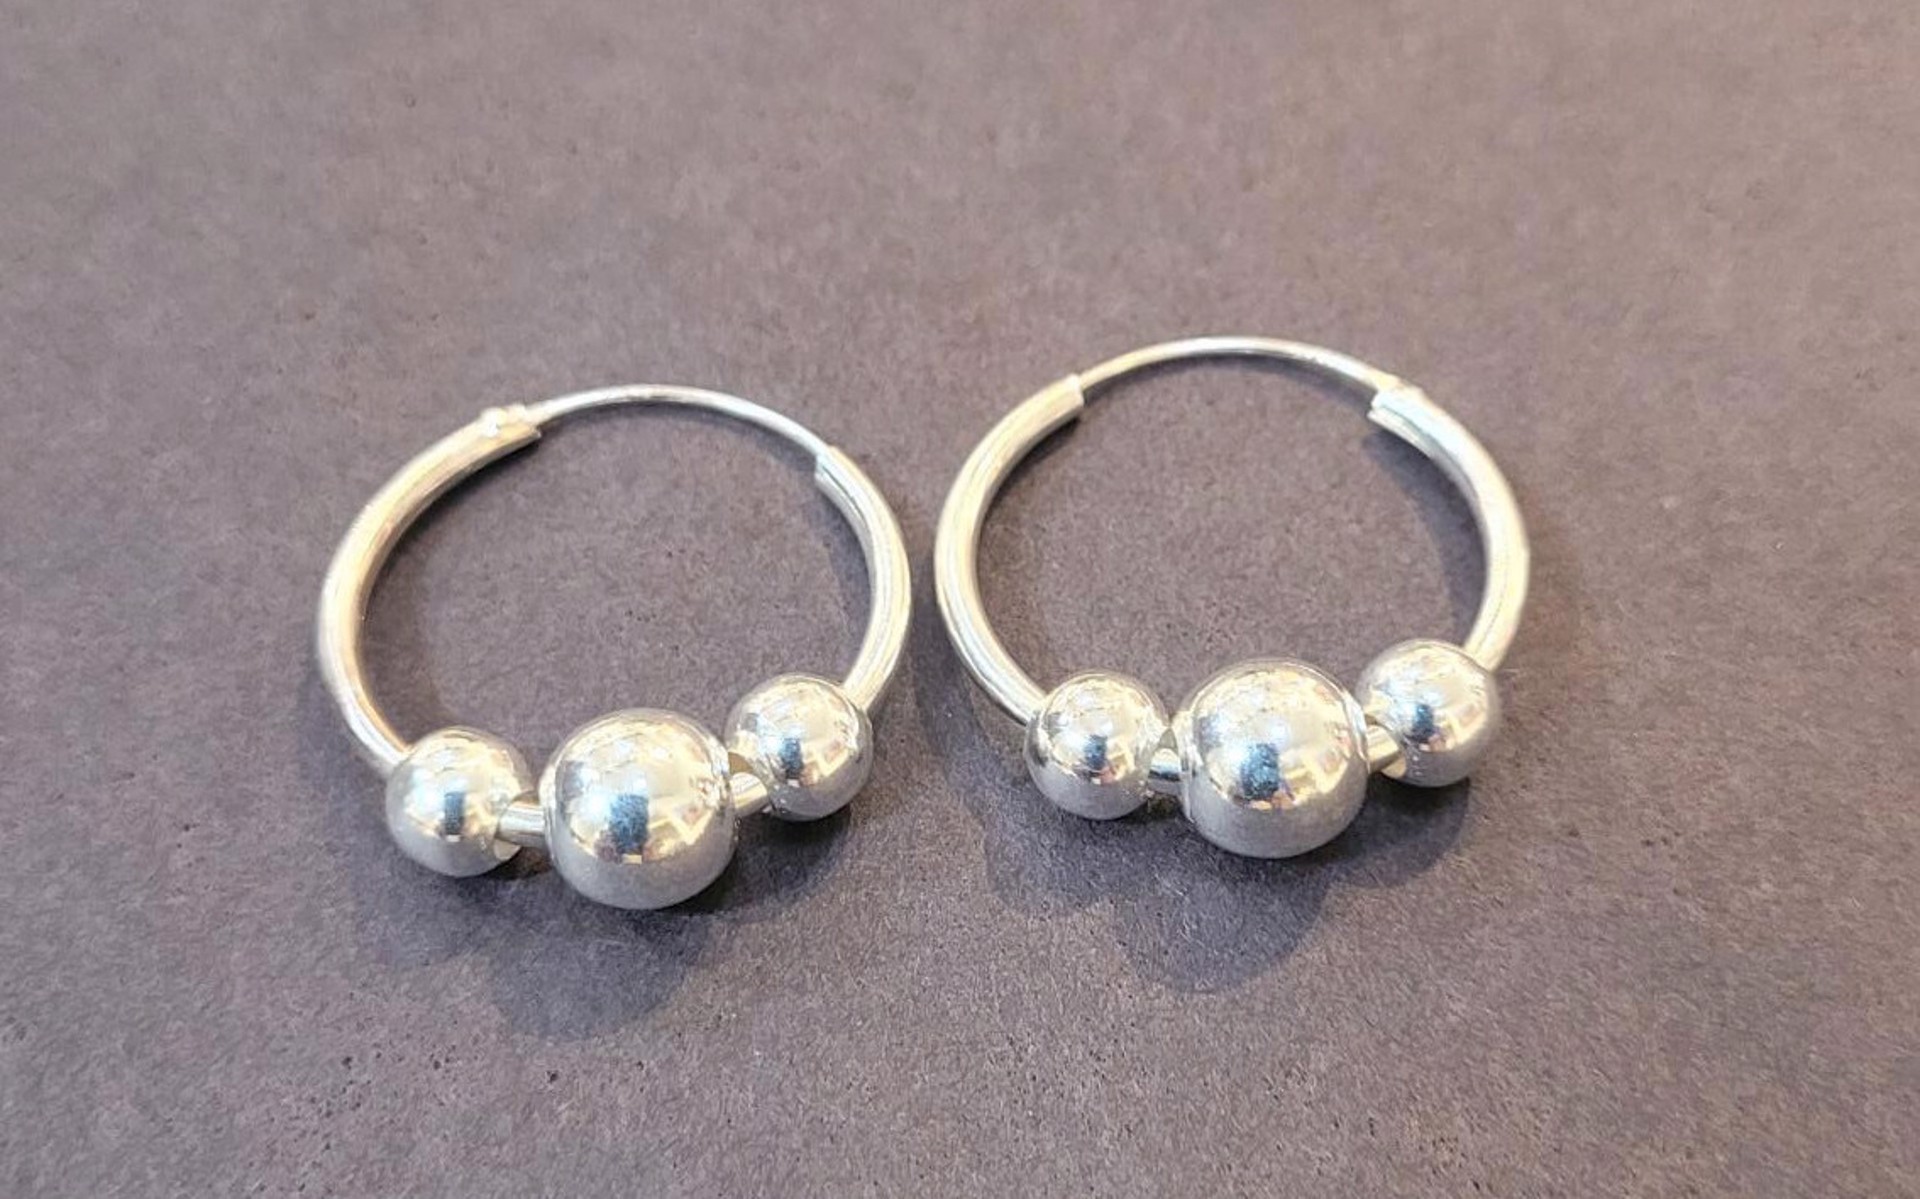 Earrings - 25mm Hoops with Three Beads in Sterling Silver by Indigo Desert Ranch - Jewelry